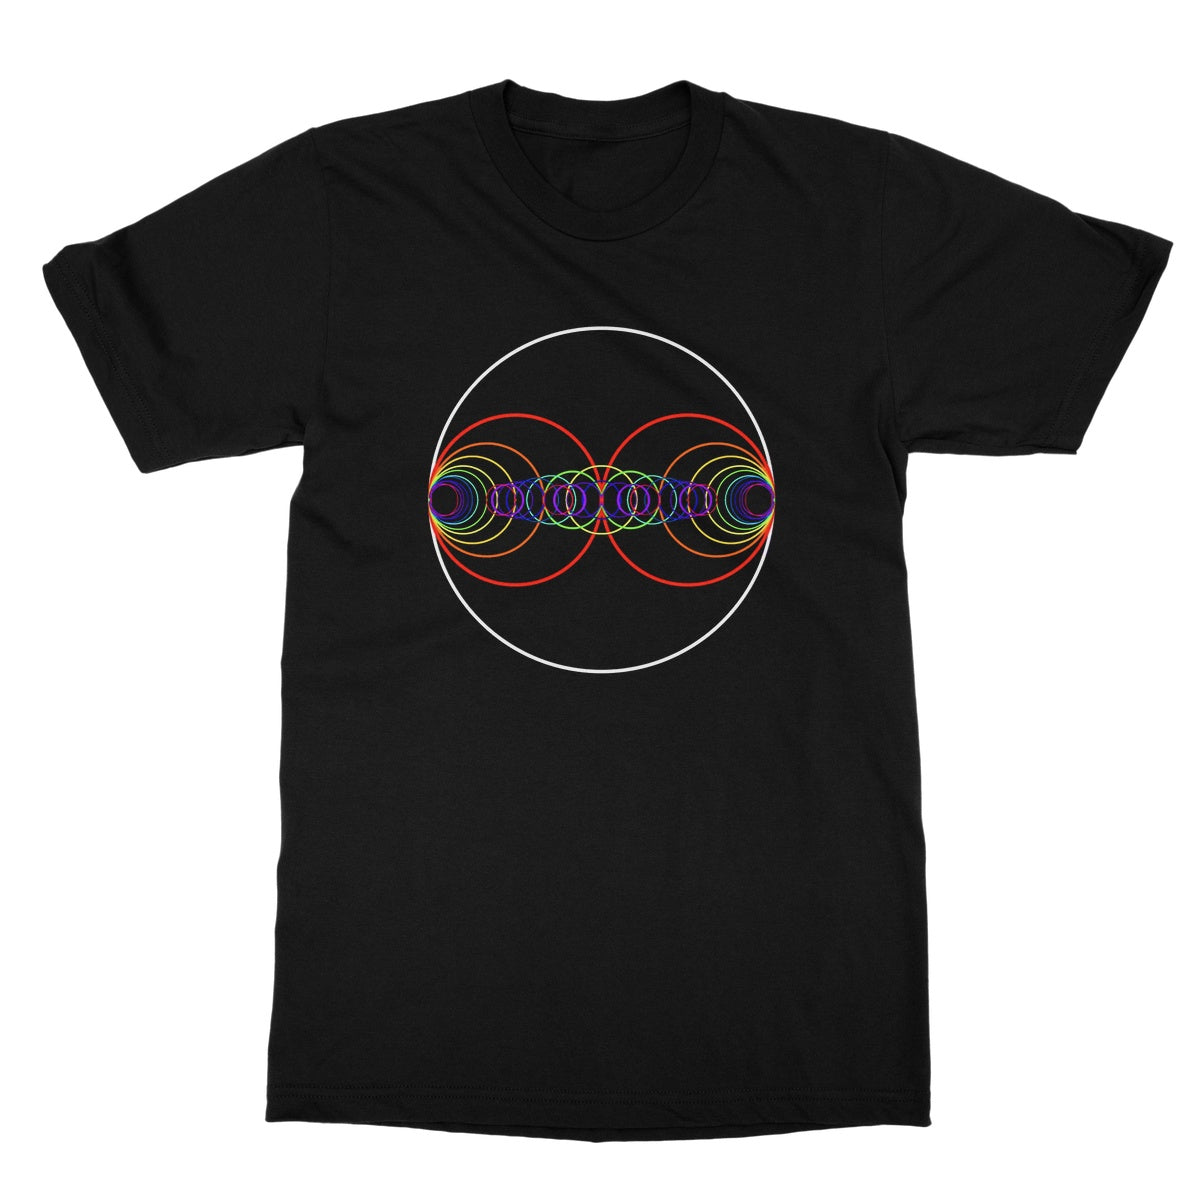 Sound waves Collide Softstyle T-Shirt